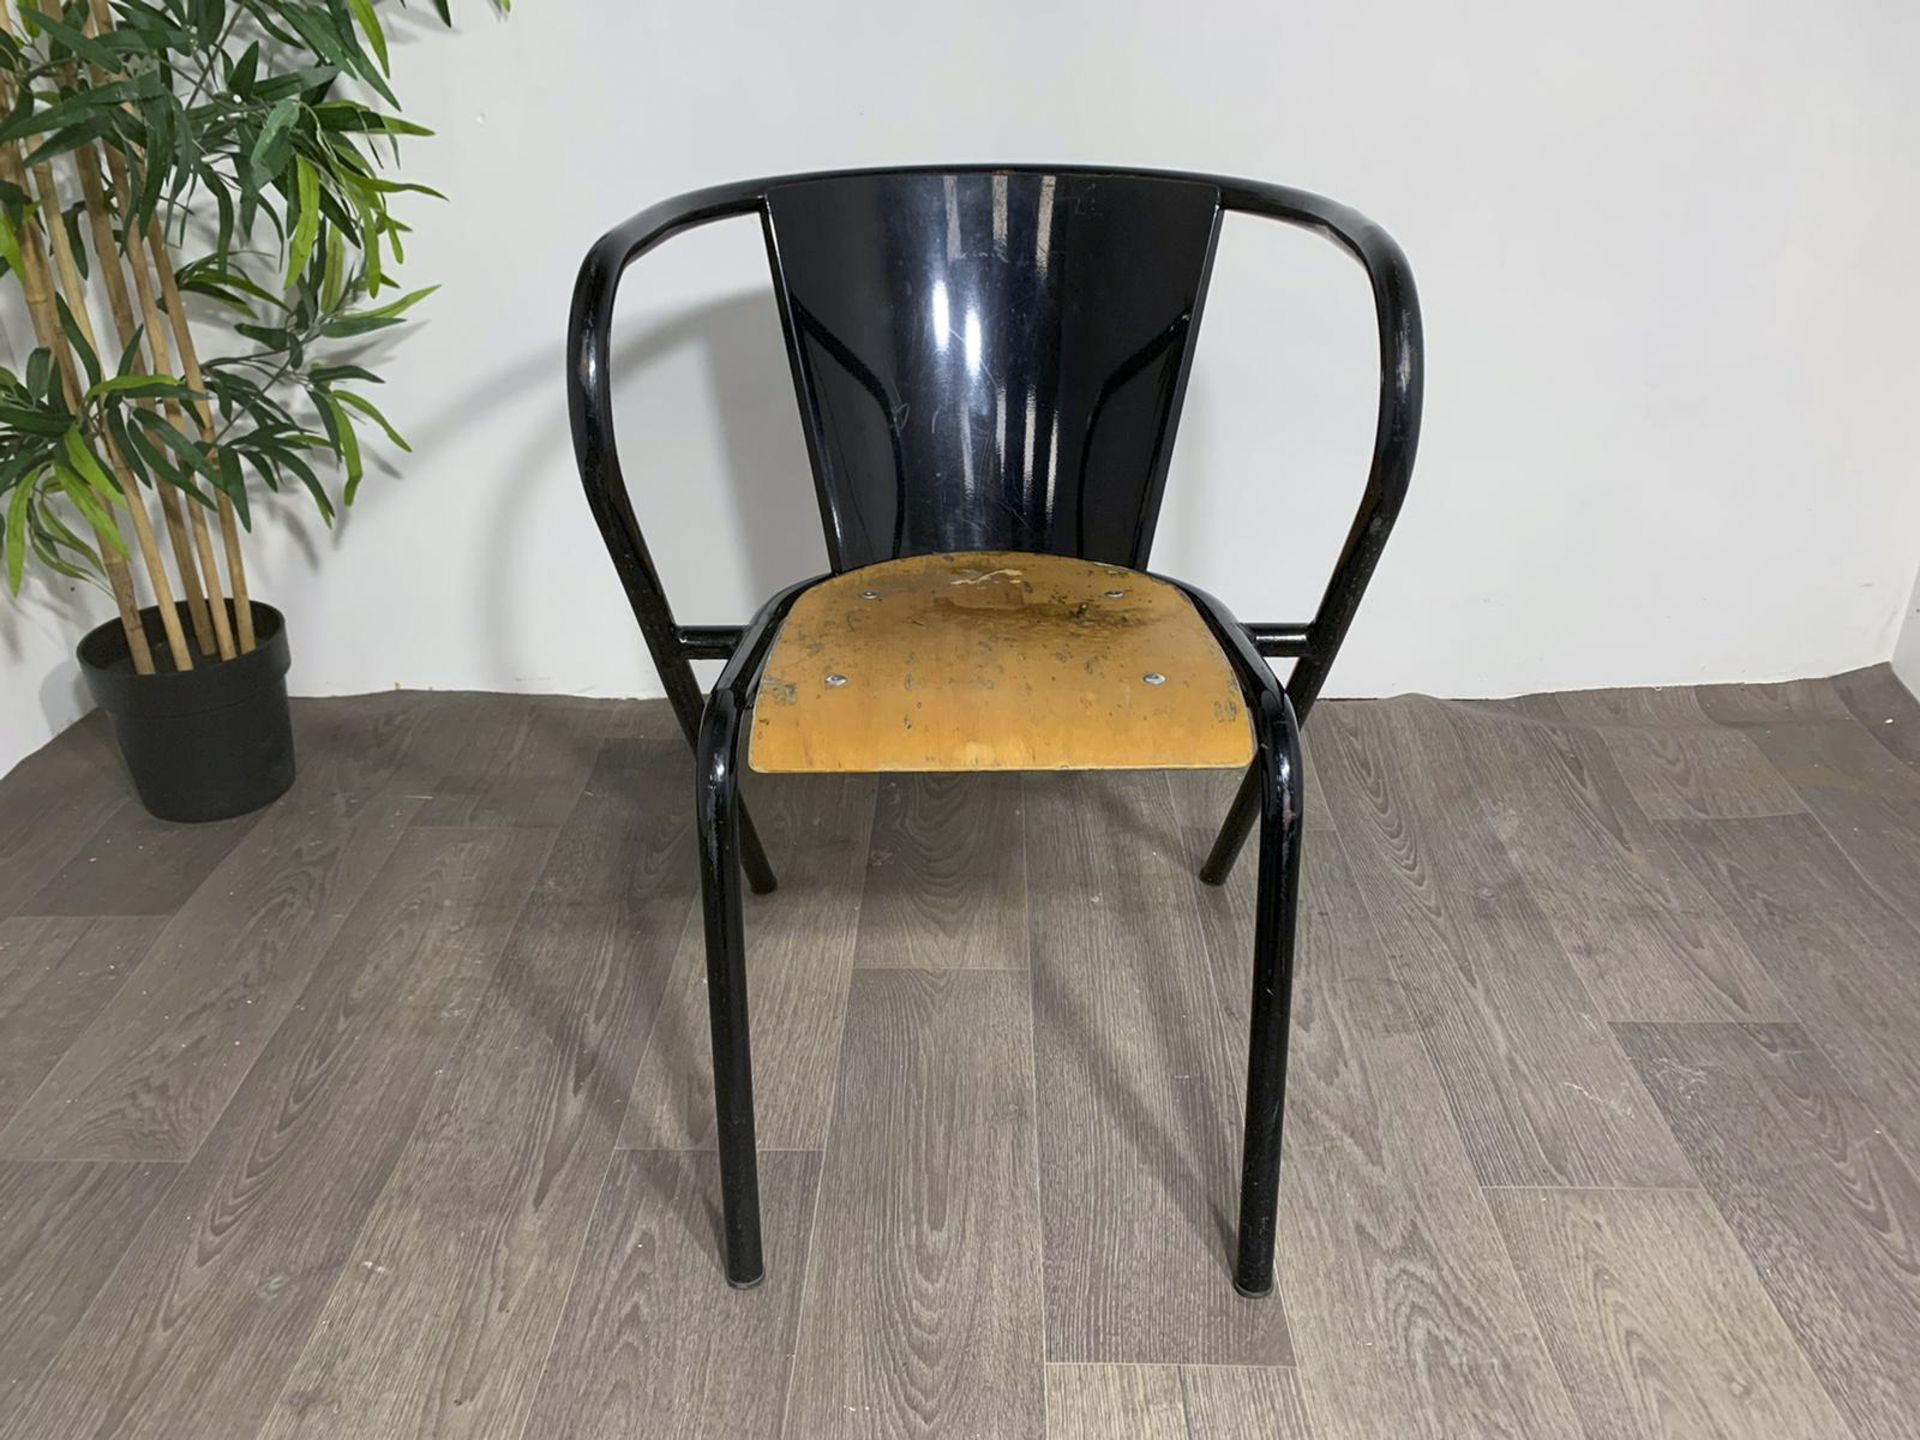 Adico 5008 Black Chair With Wooden Seat - Image 6 of 8